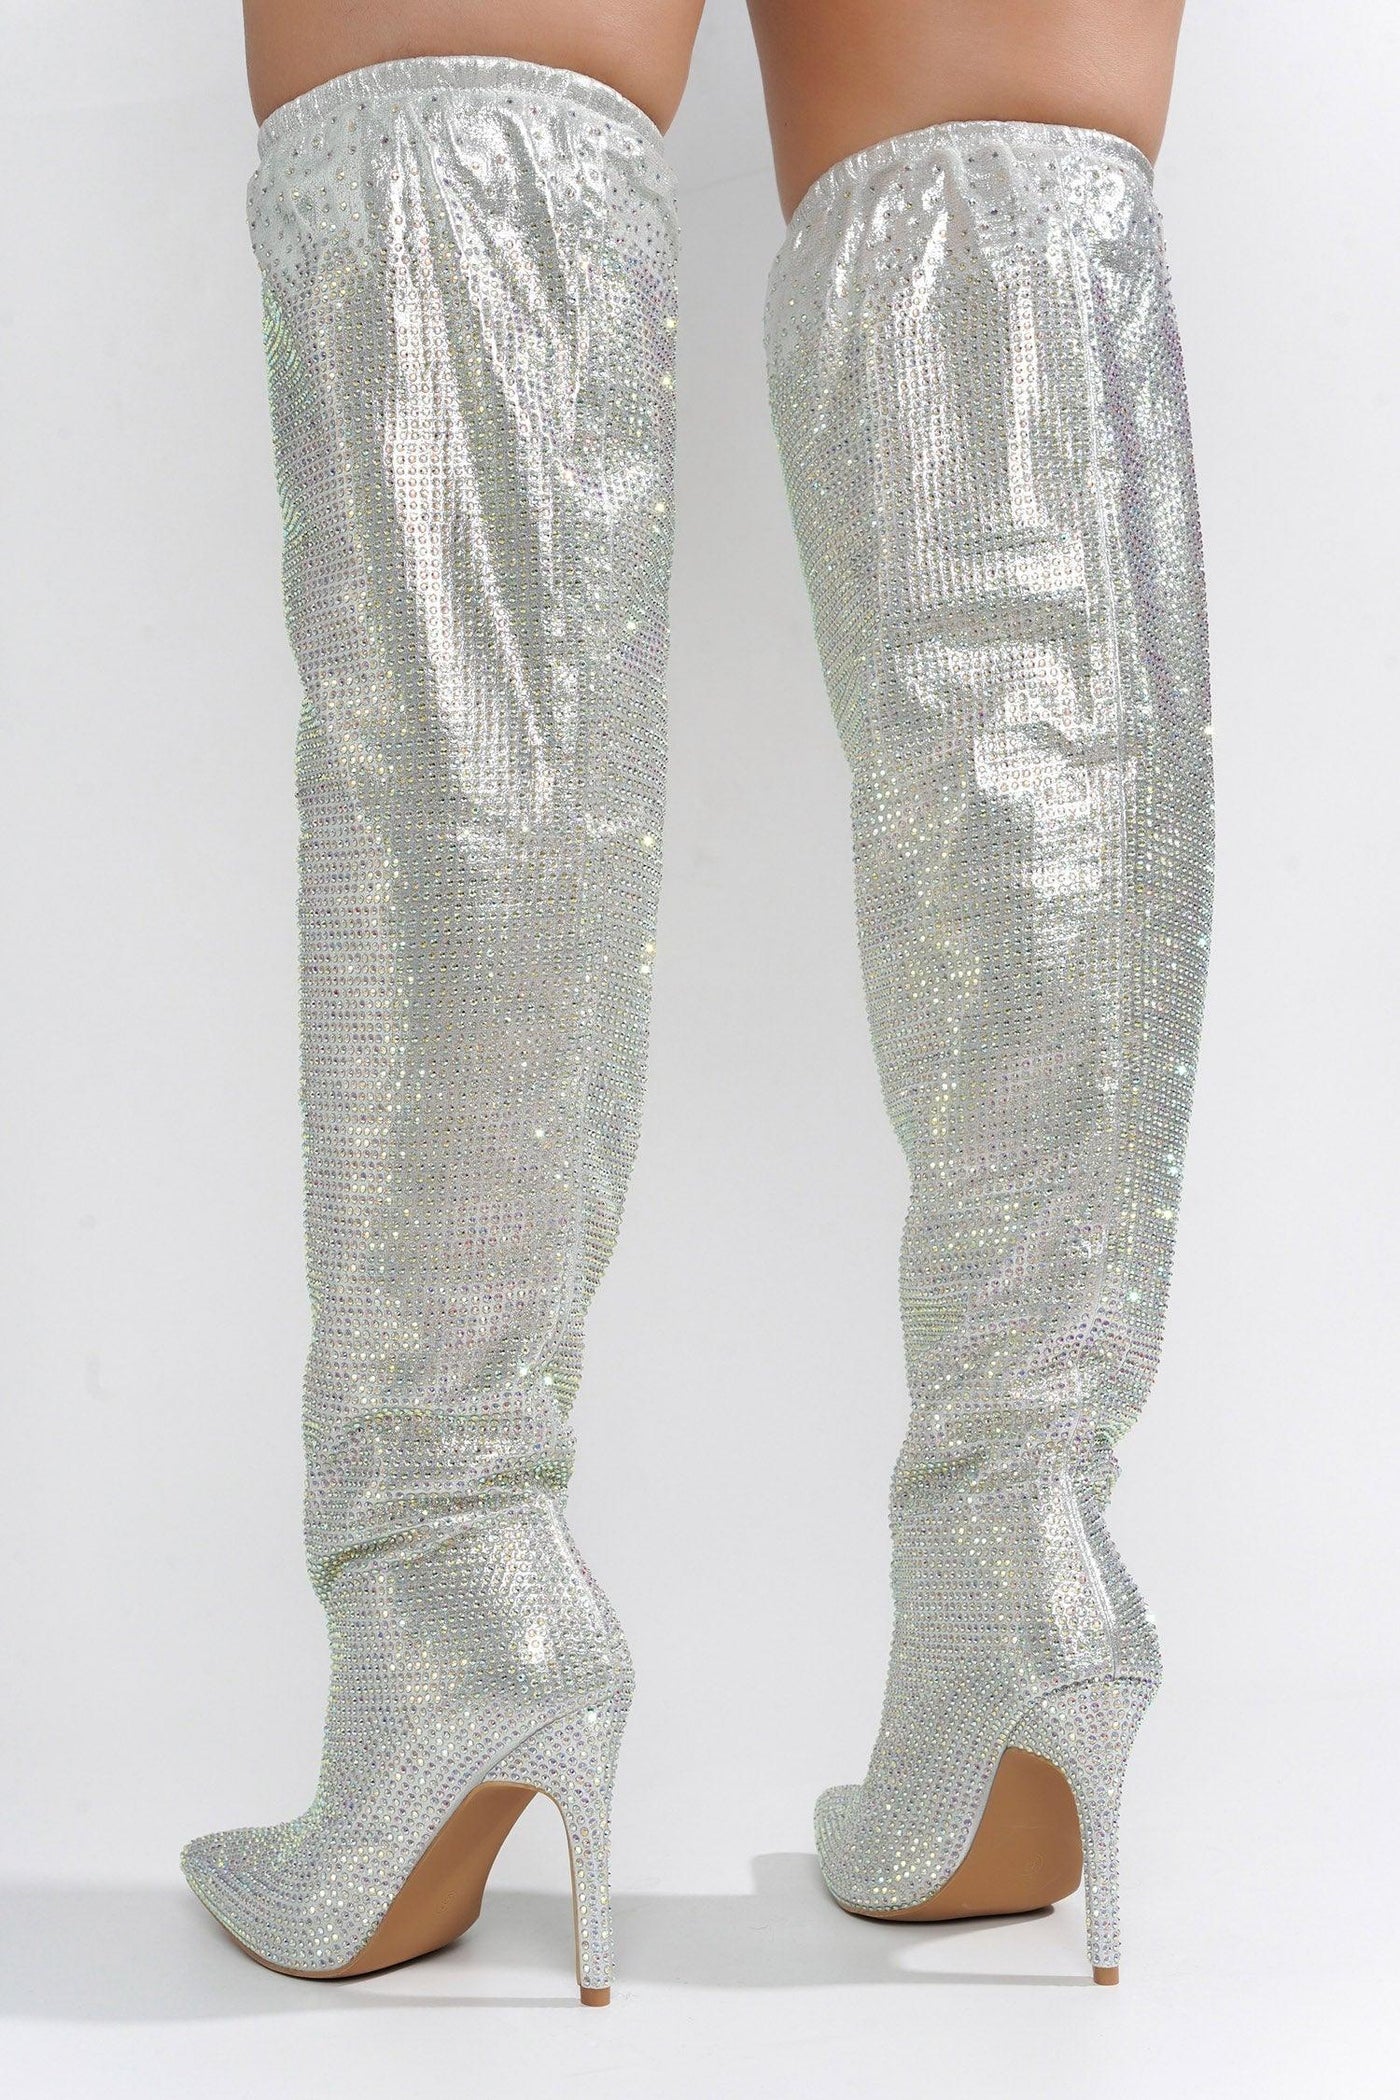 HELOMA - SILVER Thigh High Boots - AMIClubwear